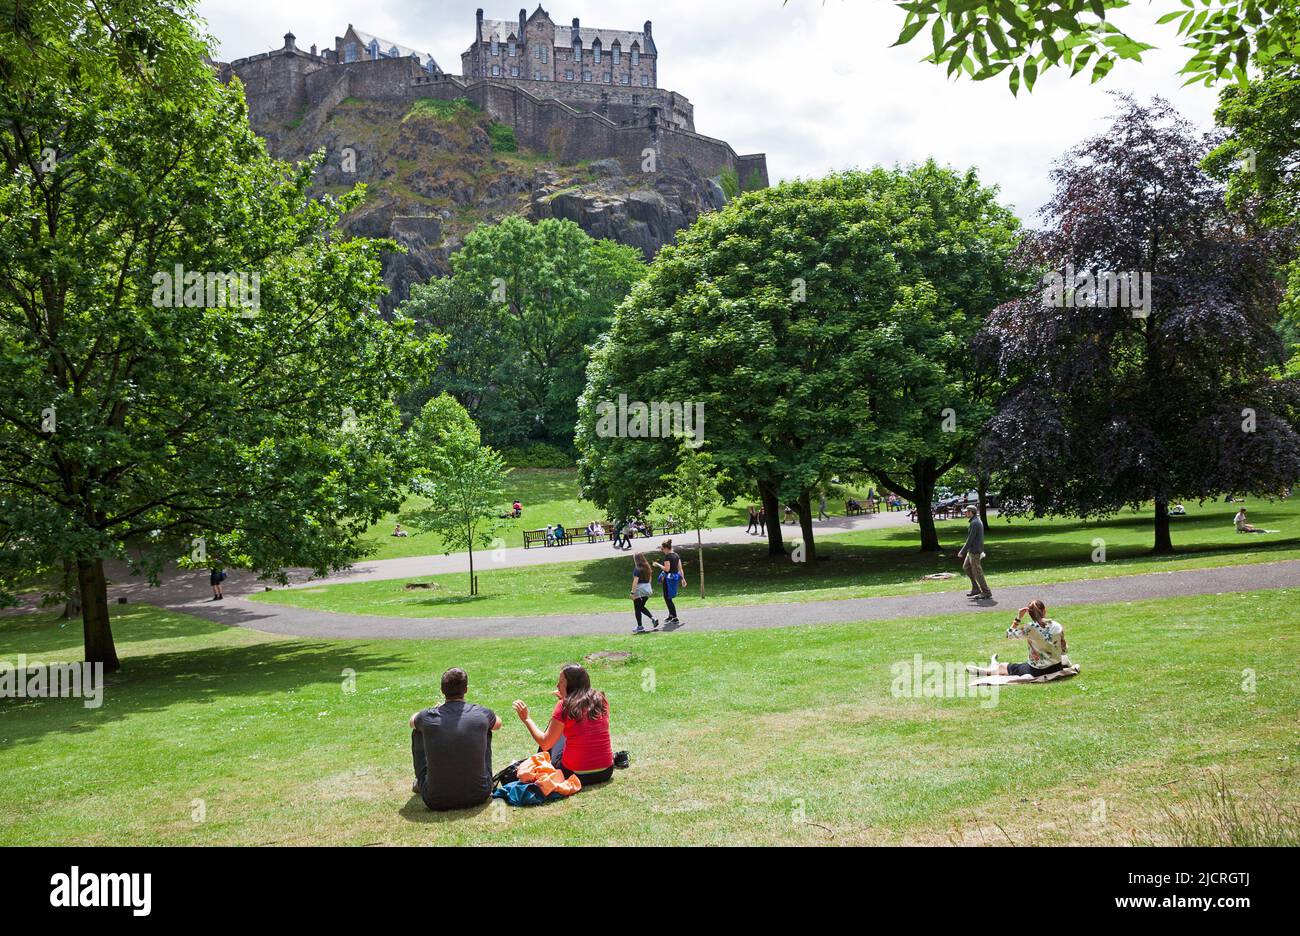 Edinburgh city centre, Scotland, UK. 15.06.2022. Summer arrives in the city after a recent cool cloudy period of weather. Mid-afternoon temperature of 18 degrees centigrade encouraging people out into the city's green spaces. Pictured: People relax in the sunshine in Princes Street Gardens West under the shadow of Edinburgh Castle Credit: Scottishcreative/alamy live news. Stock Photo